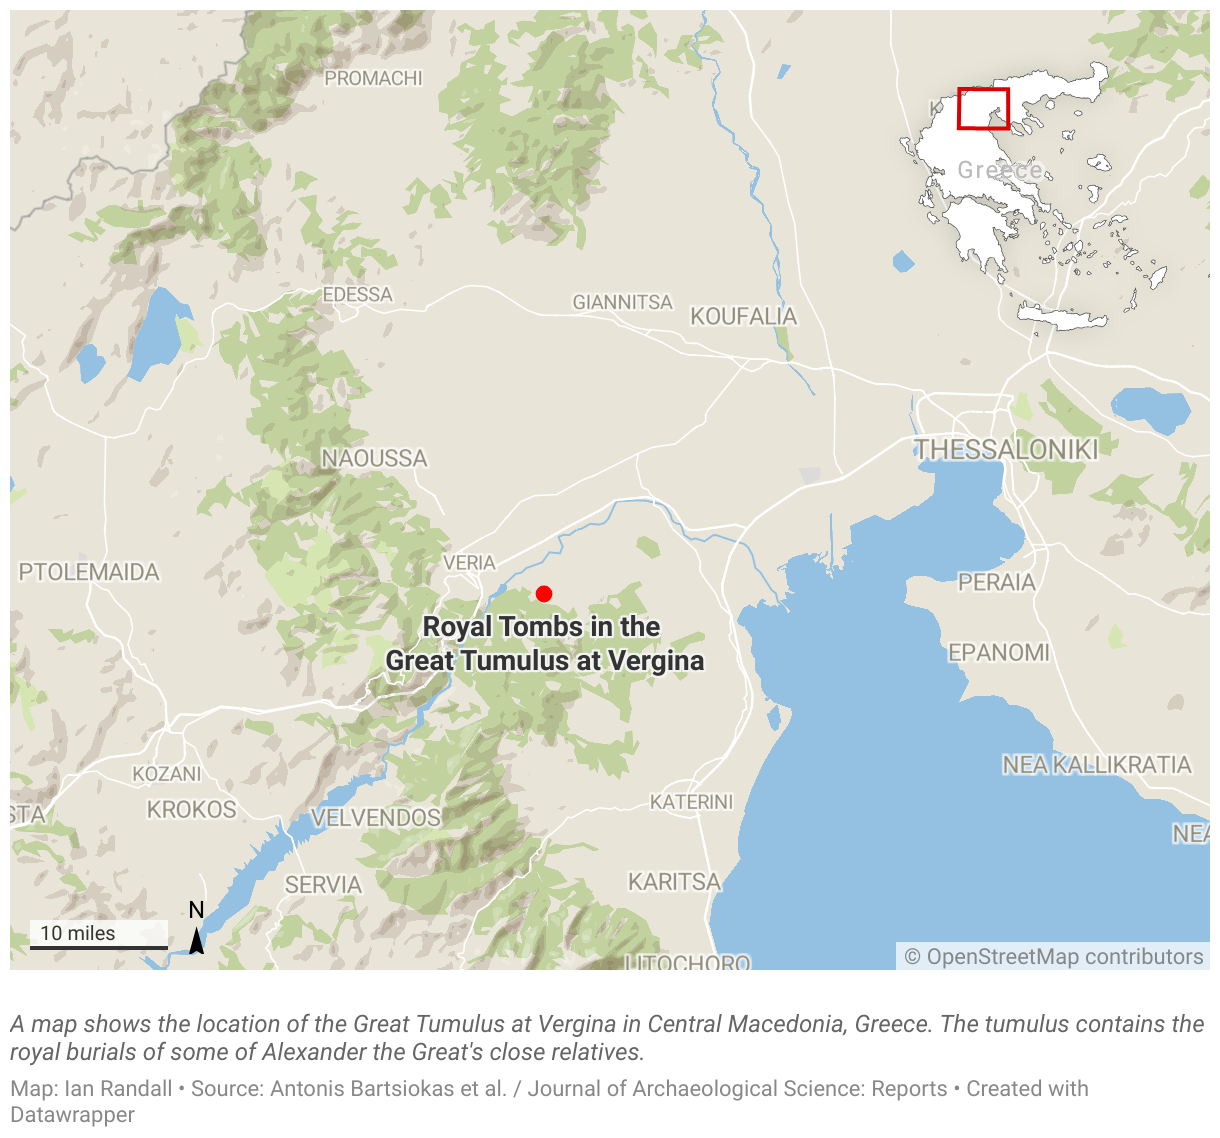 A map shows the location of the Great Tumulus at Vergina in Central Macedonia, Greece.